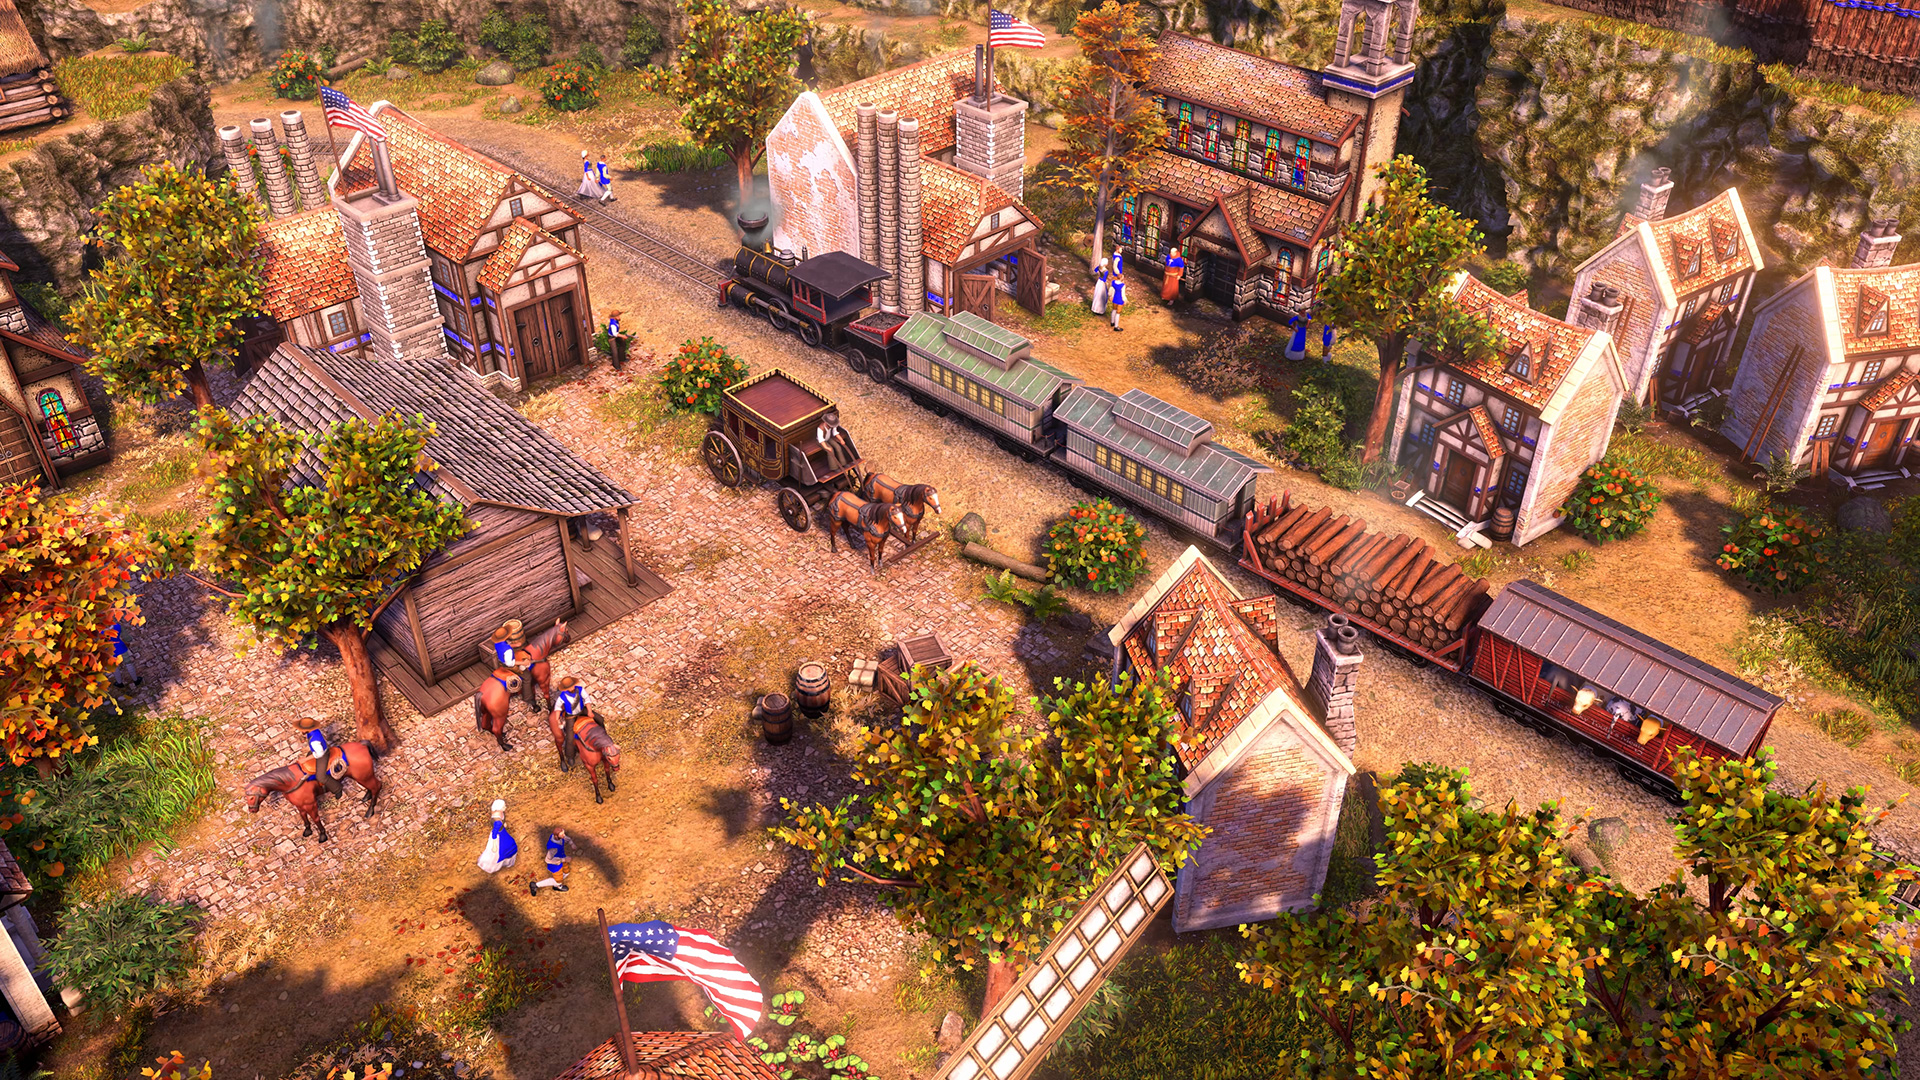 Preview Age Of Empires Iii Has Never Looked Better Cgmagazine